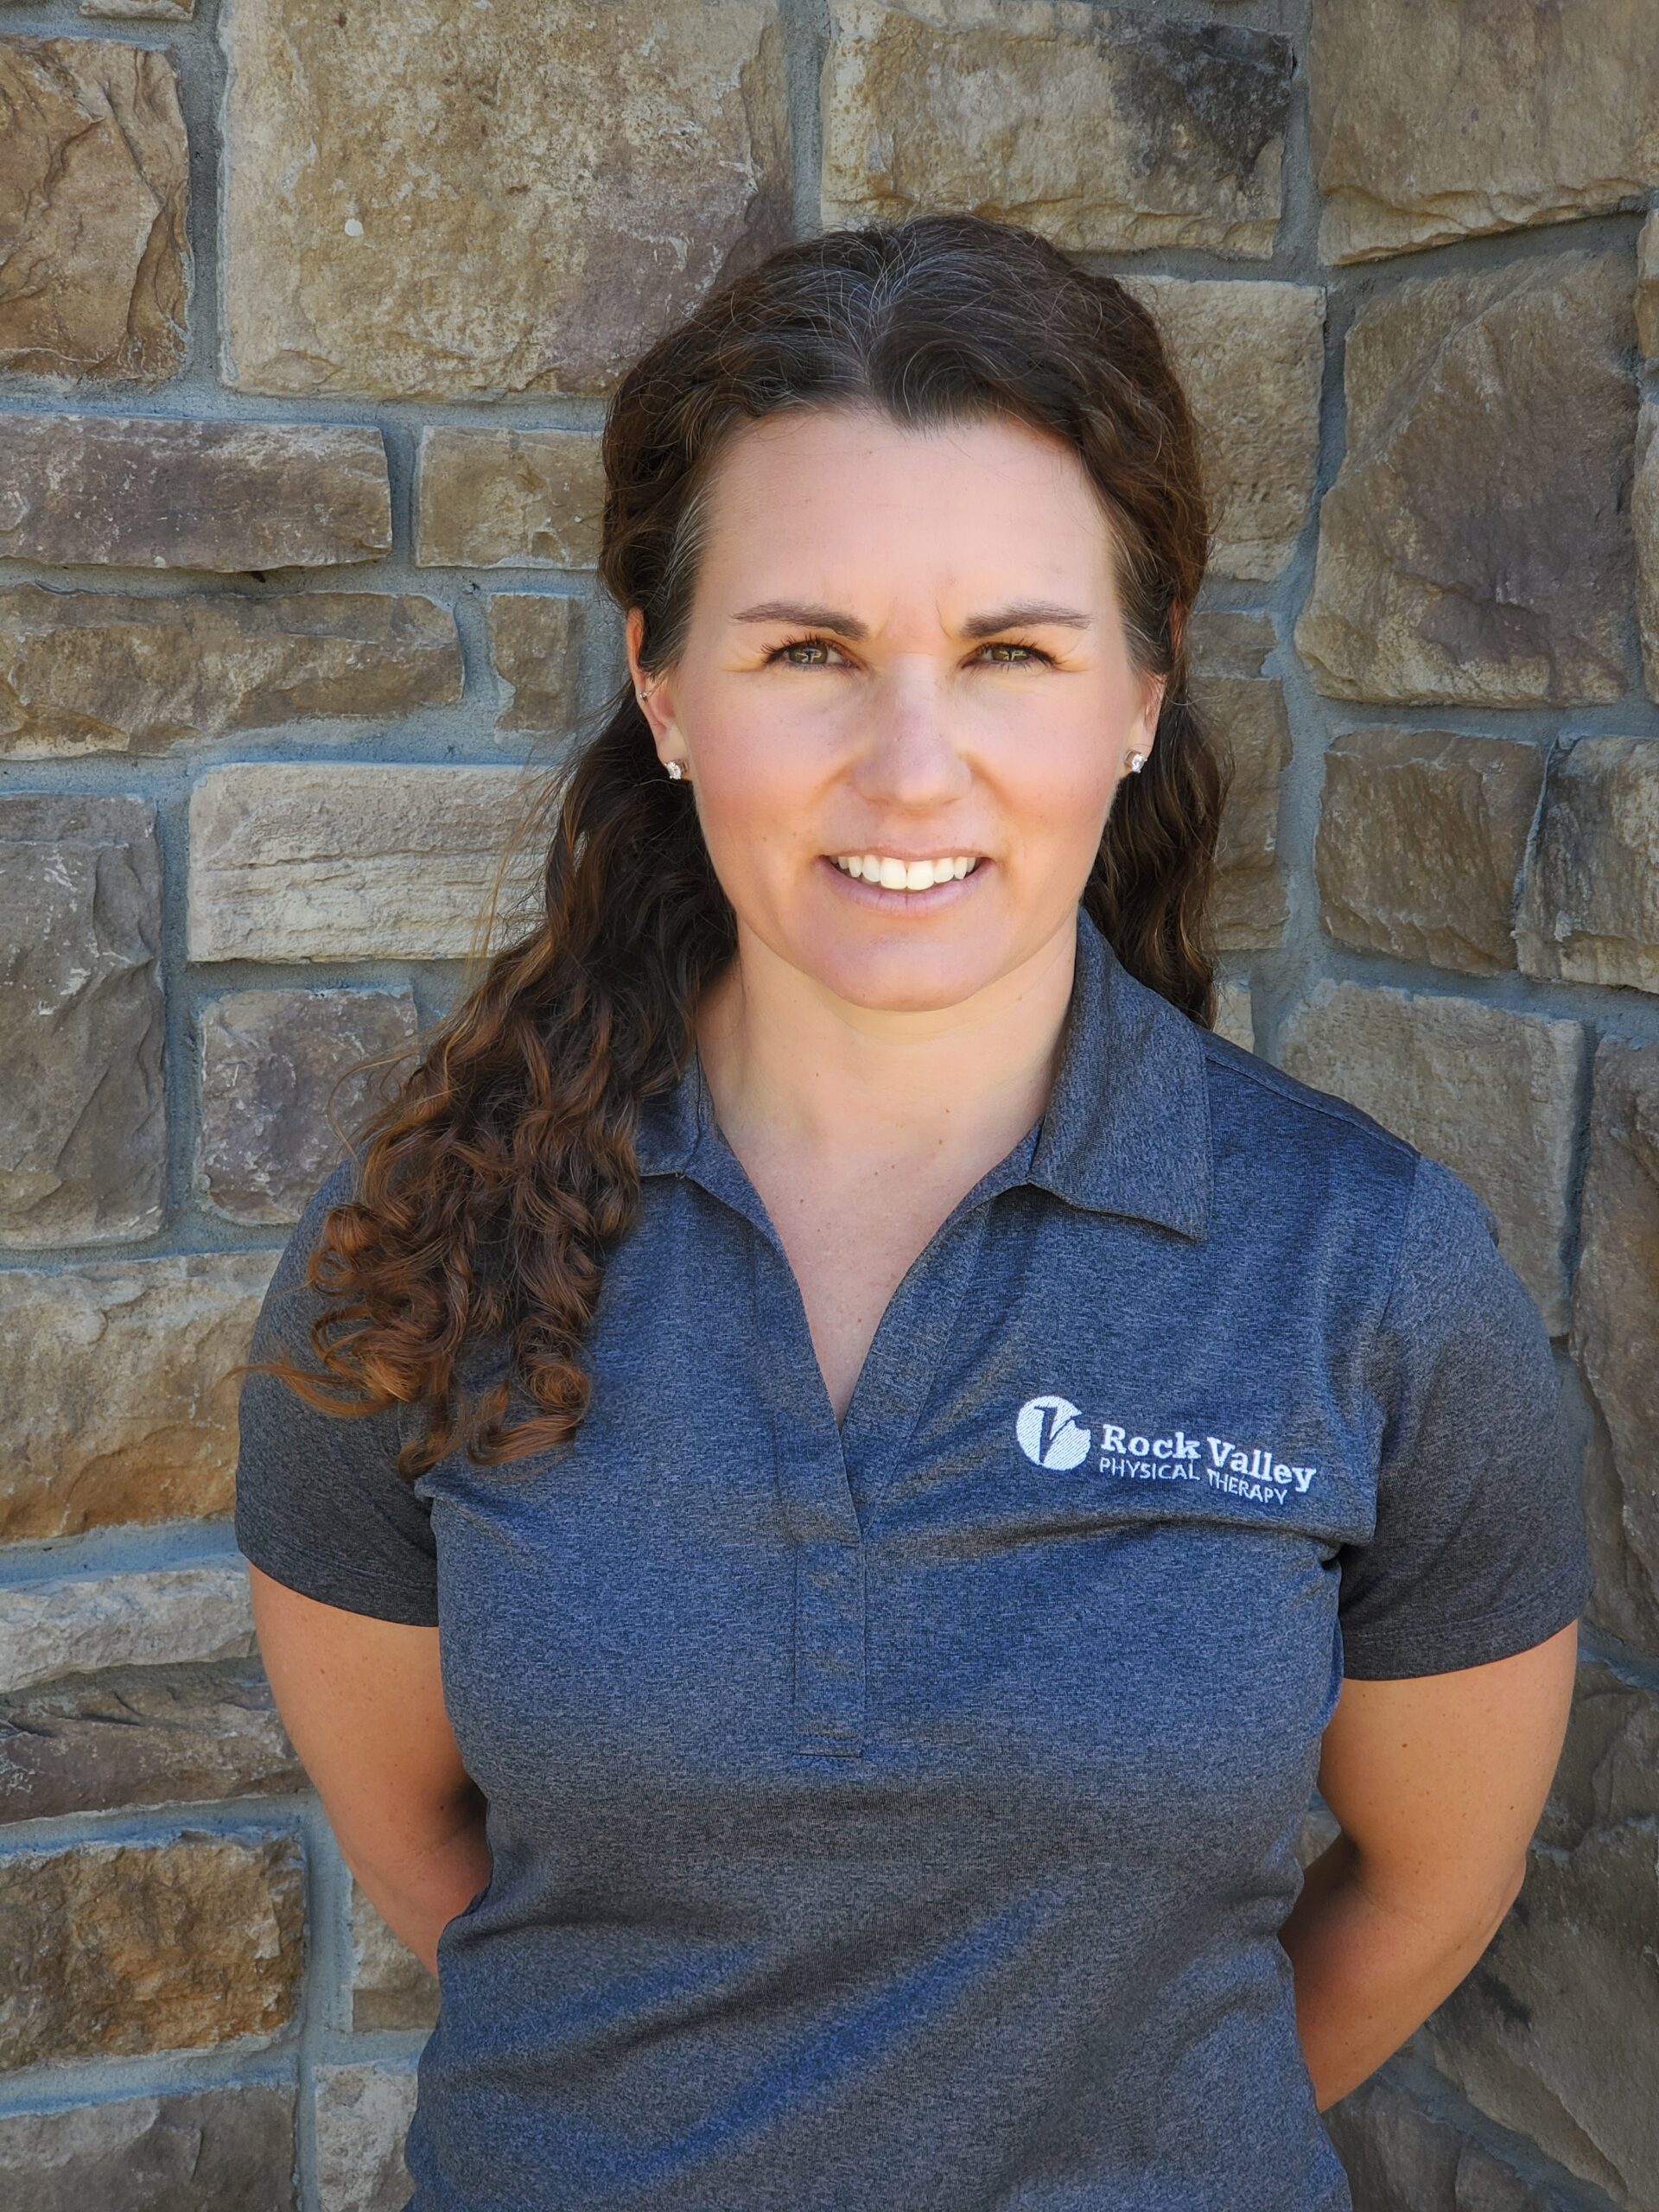 Physical Therapist at Rock Valley: Megan Franks